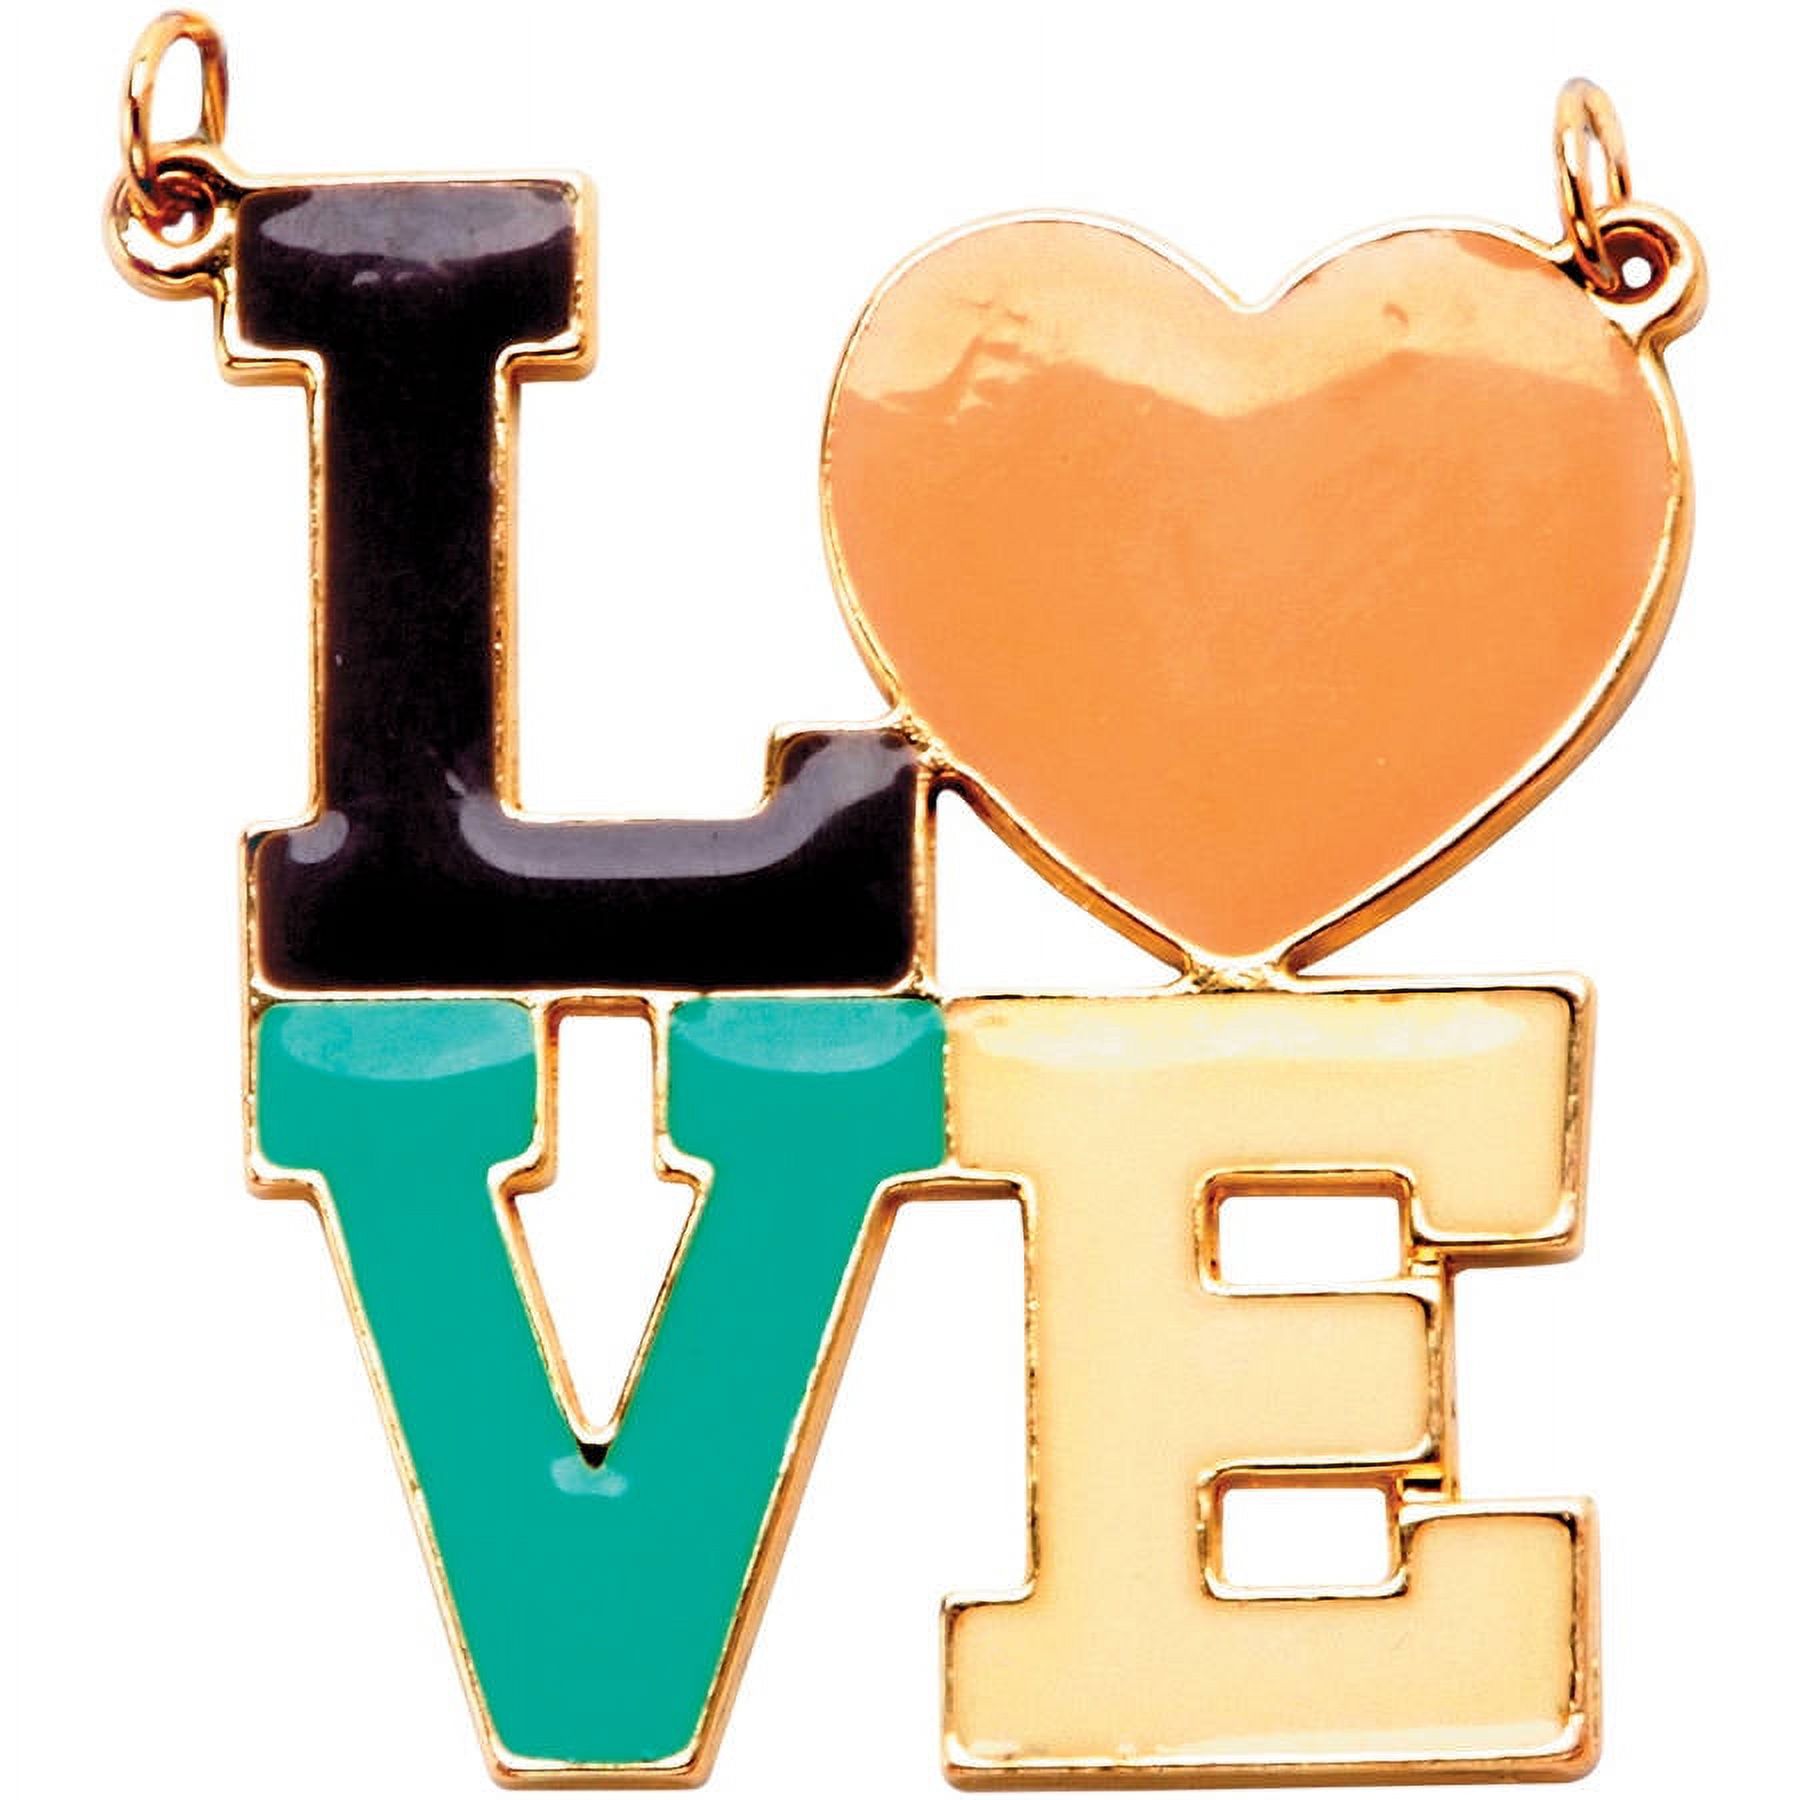 Jewelry Pendant: Love, Colored Enamel and Gold, 2 x 1.92 inches - image 2 of 2